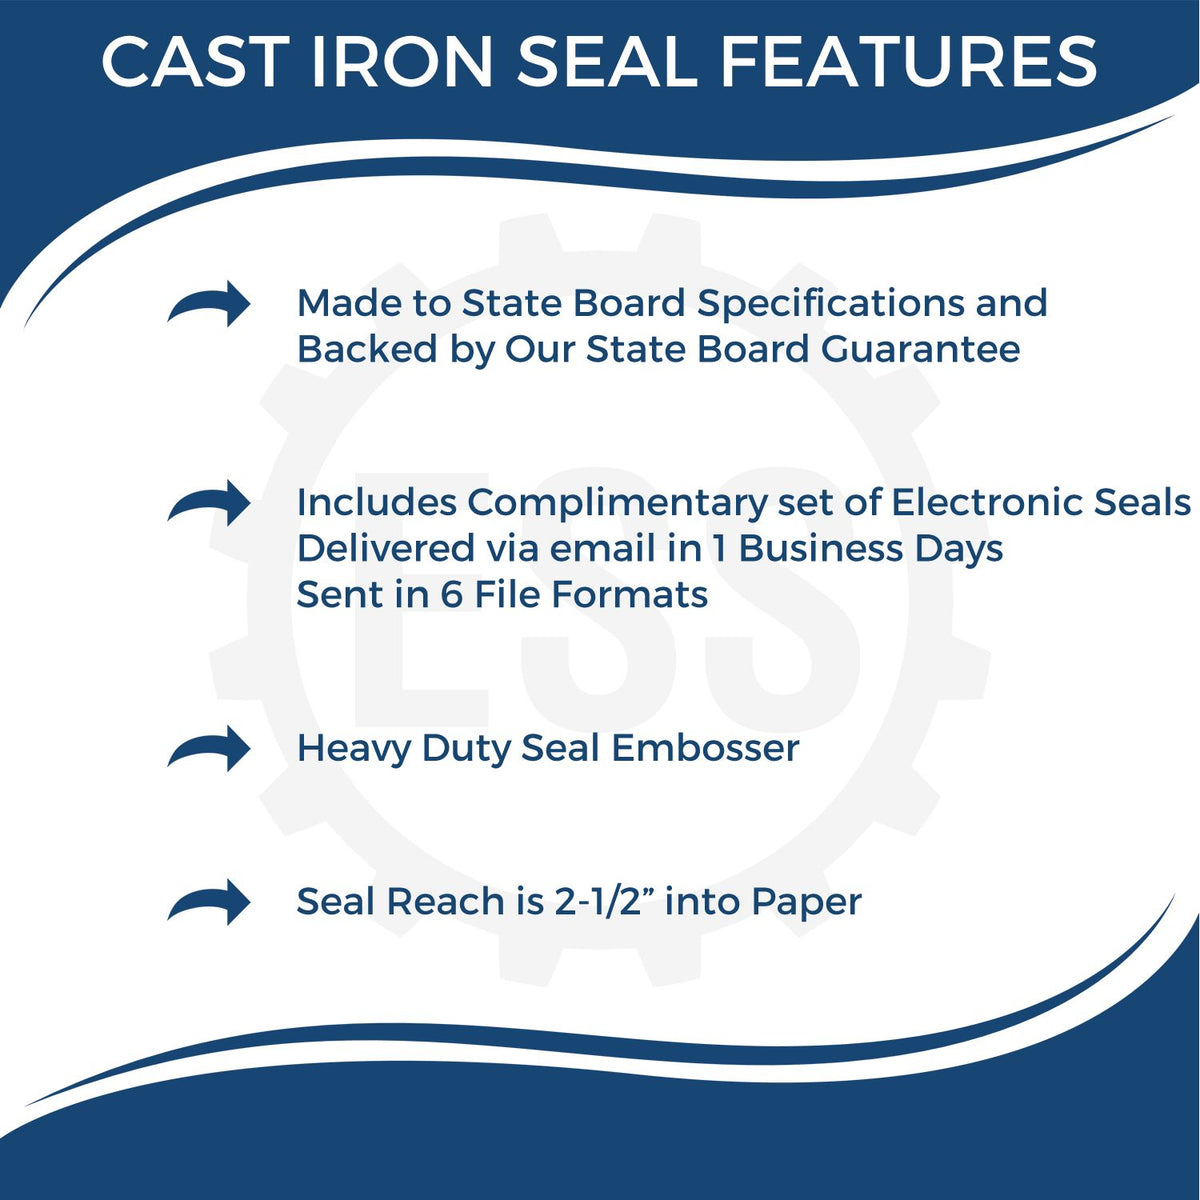 A picture of an infographic highlighting the selling points for the Heavy Duty Cast Iron Delaware Geologist Seal Embosser